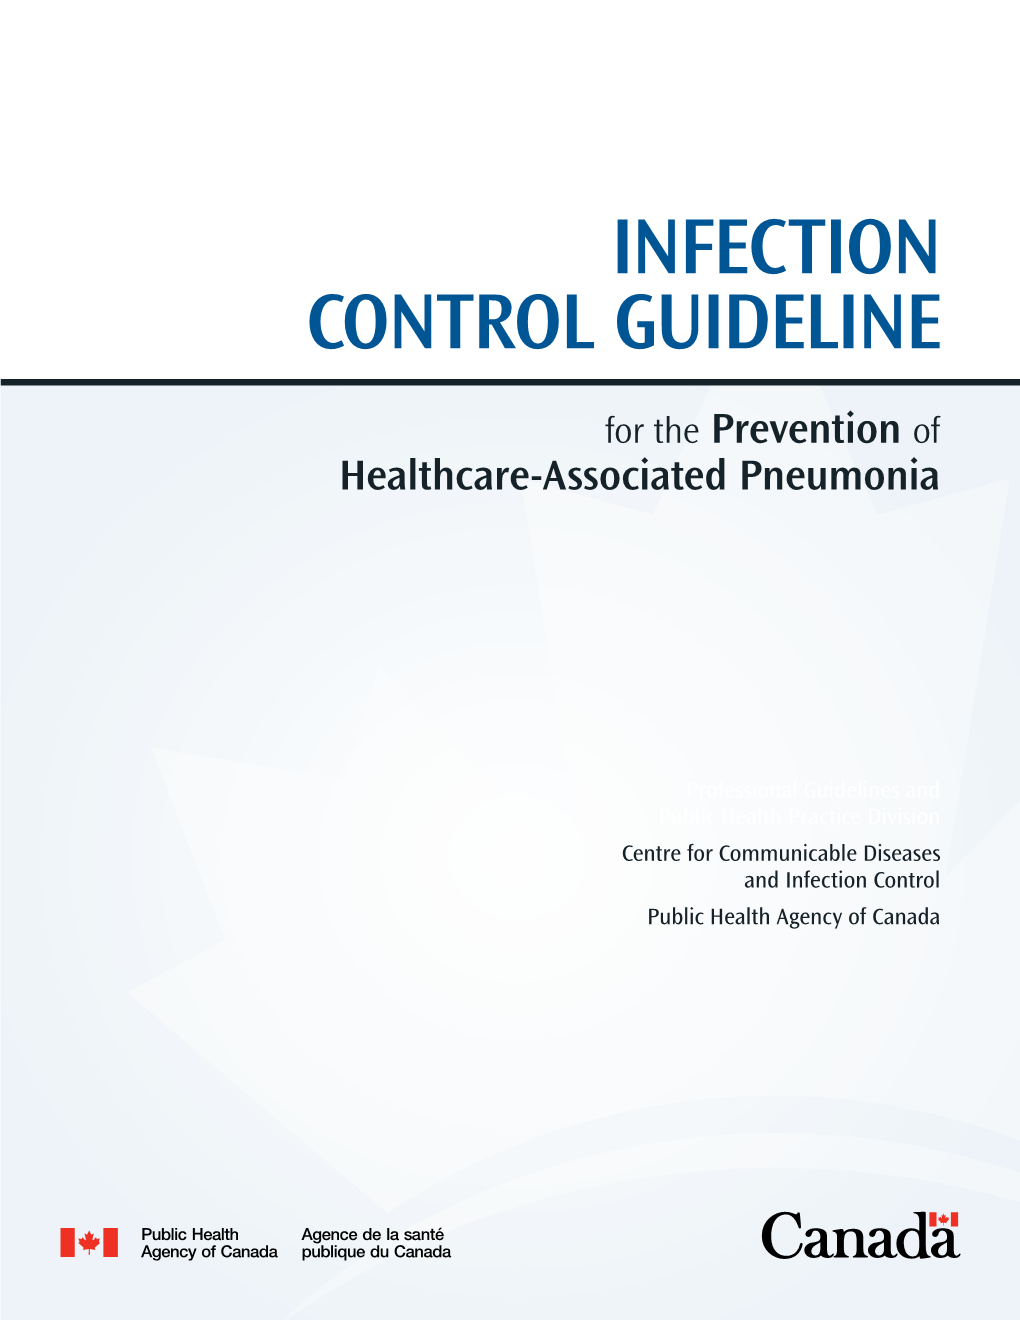 PHAC's Infection Control Guideline for the Prevention of Healthcare-Associated Pneumonia